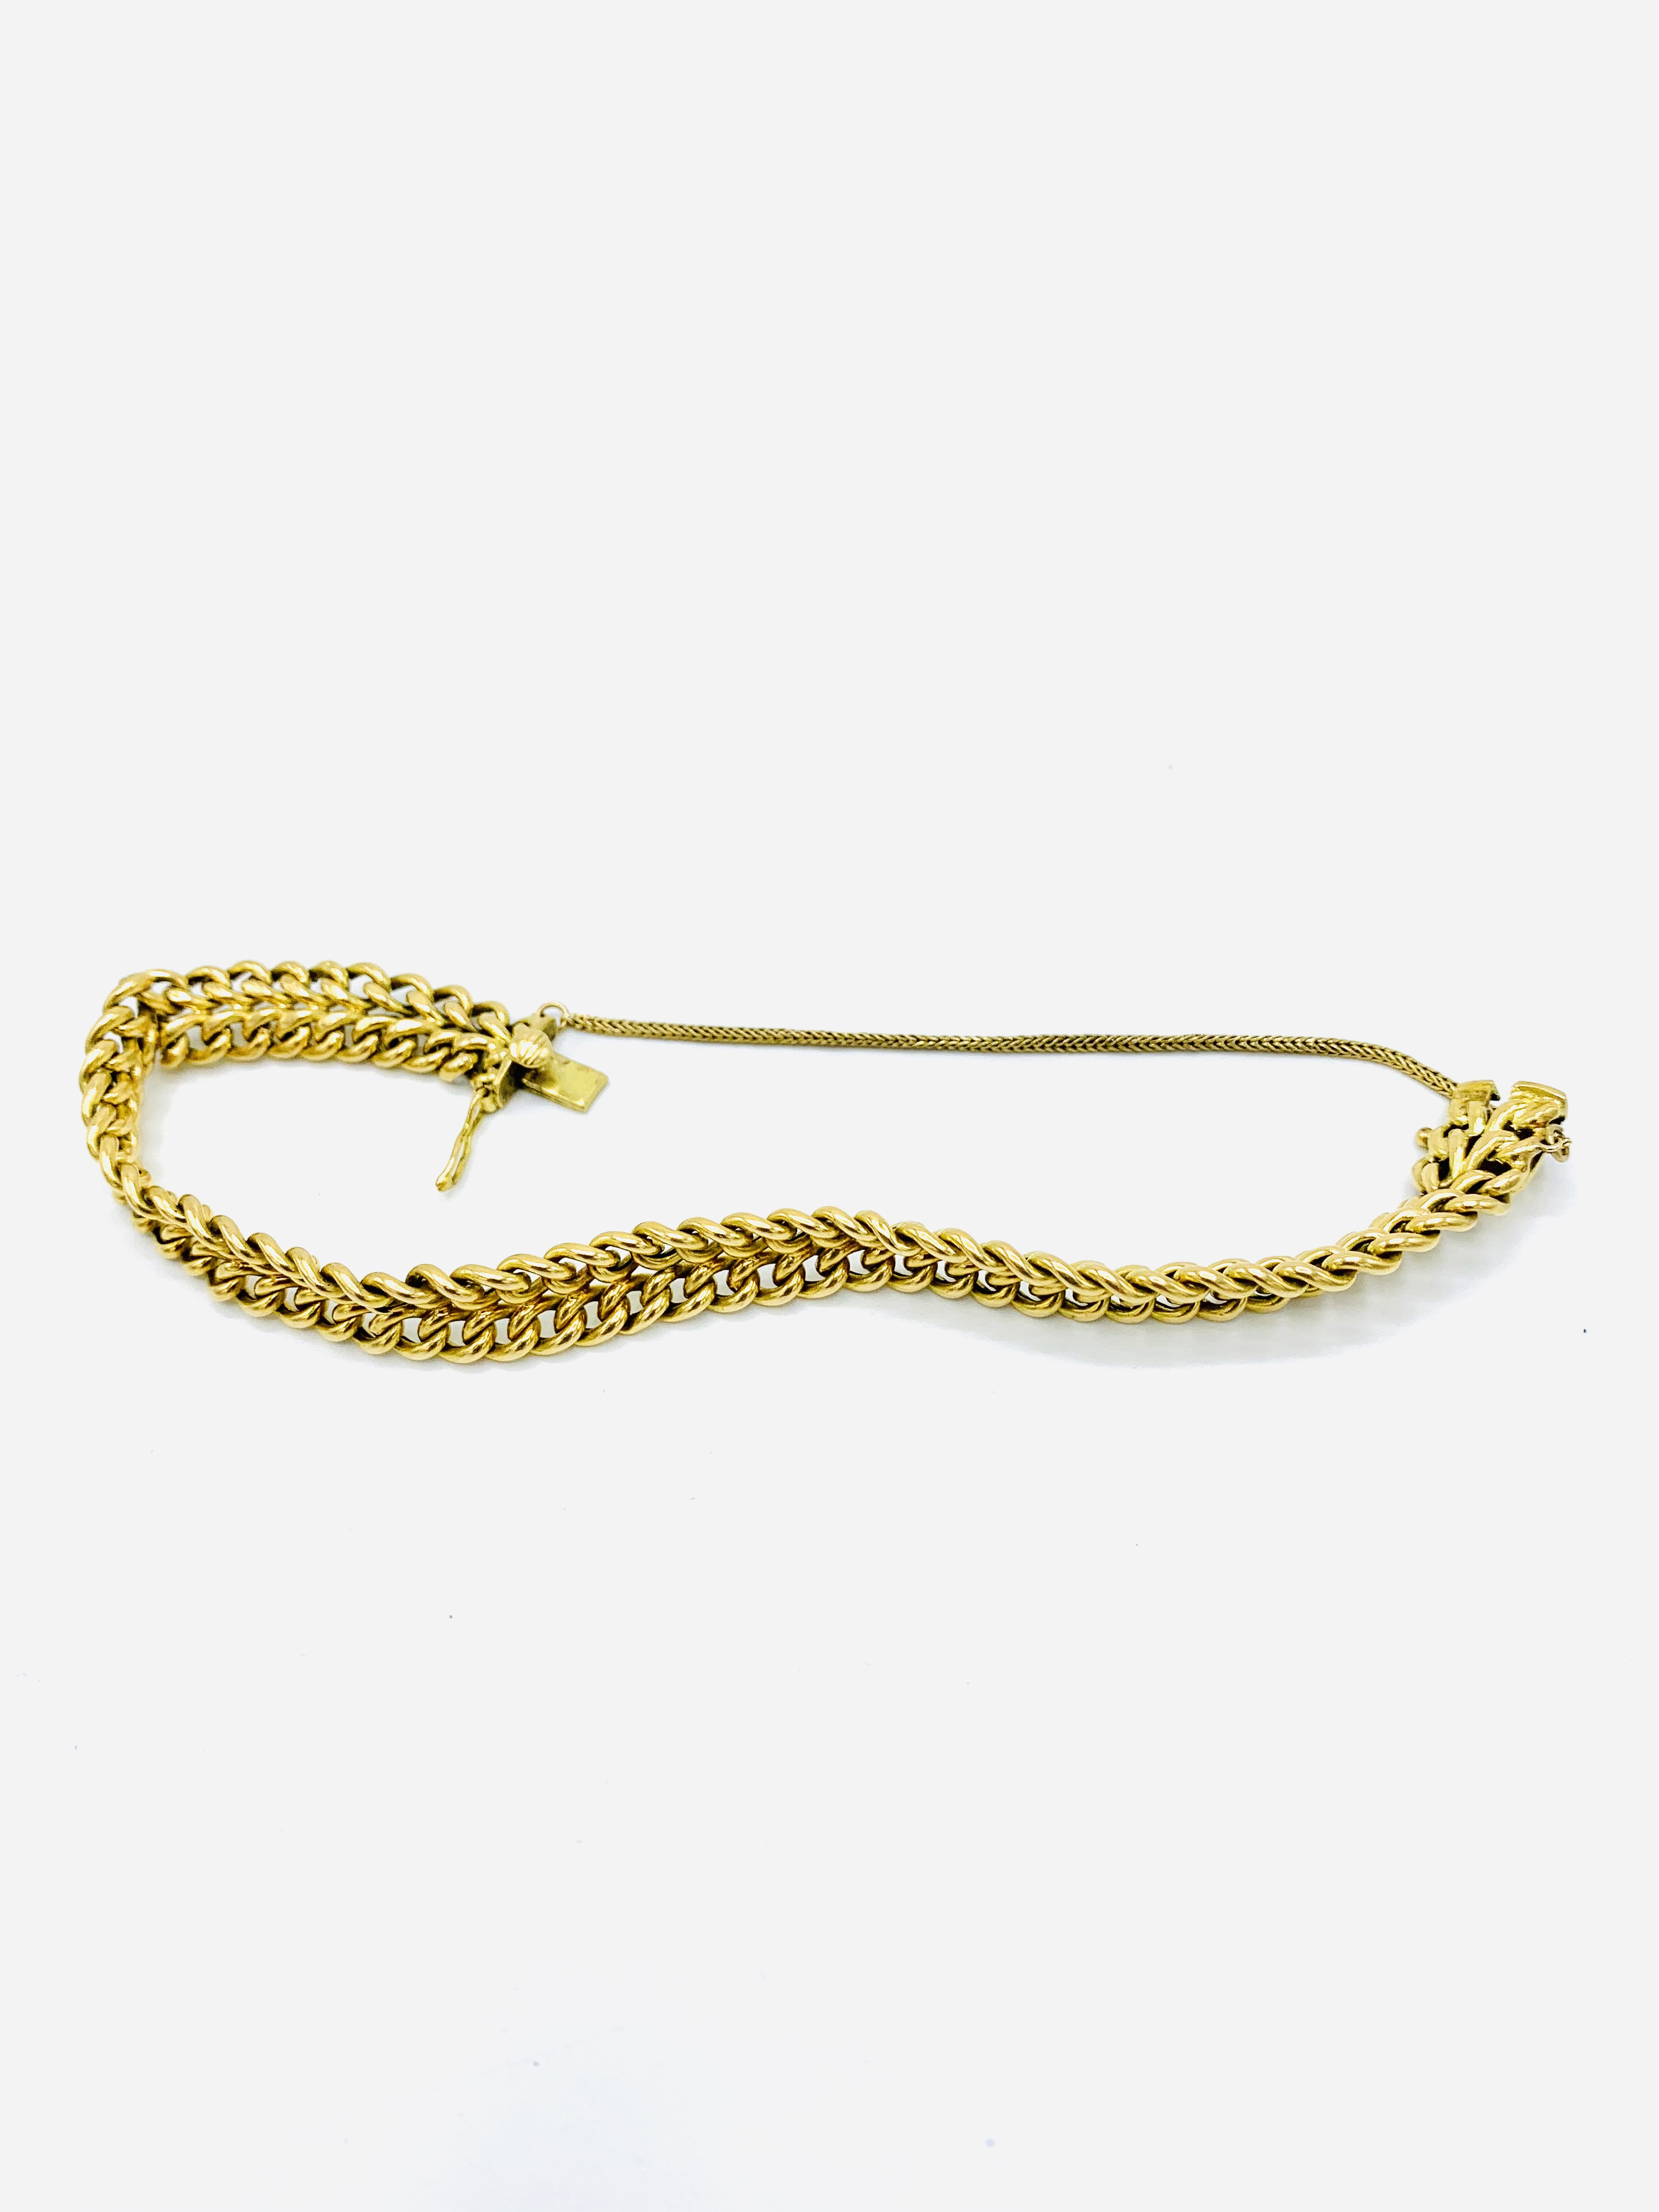 375 gold double chain bracelet - Image 3 of 3